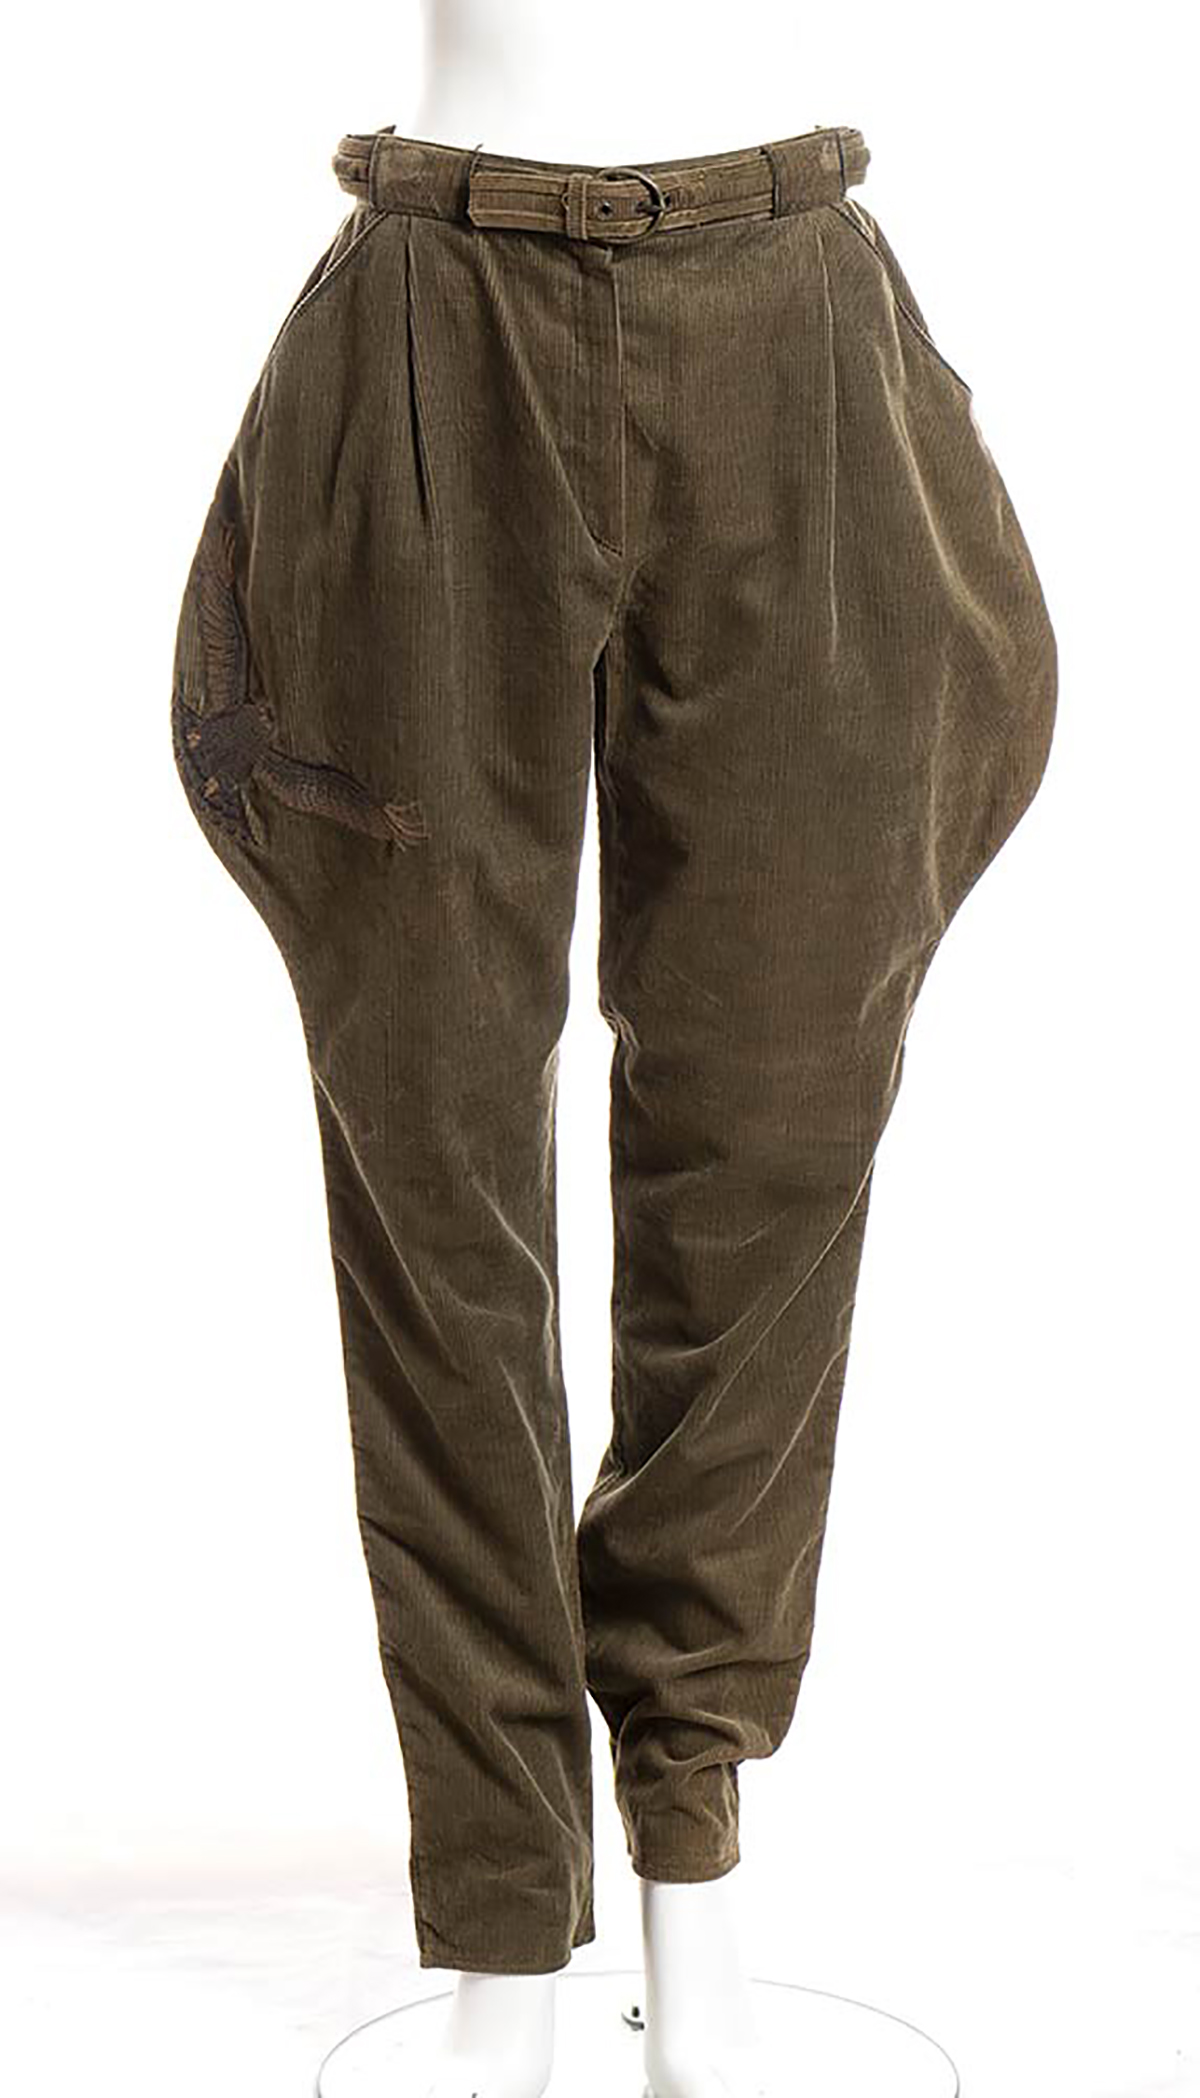 GIANNI VERSACE COTTON TROUSER 1981 ca Cotton corduroy dove gray trouser, side embroidery. General